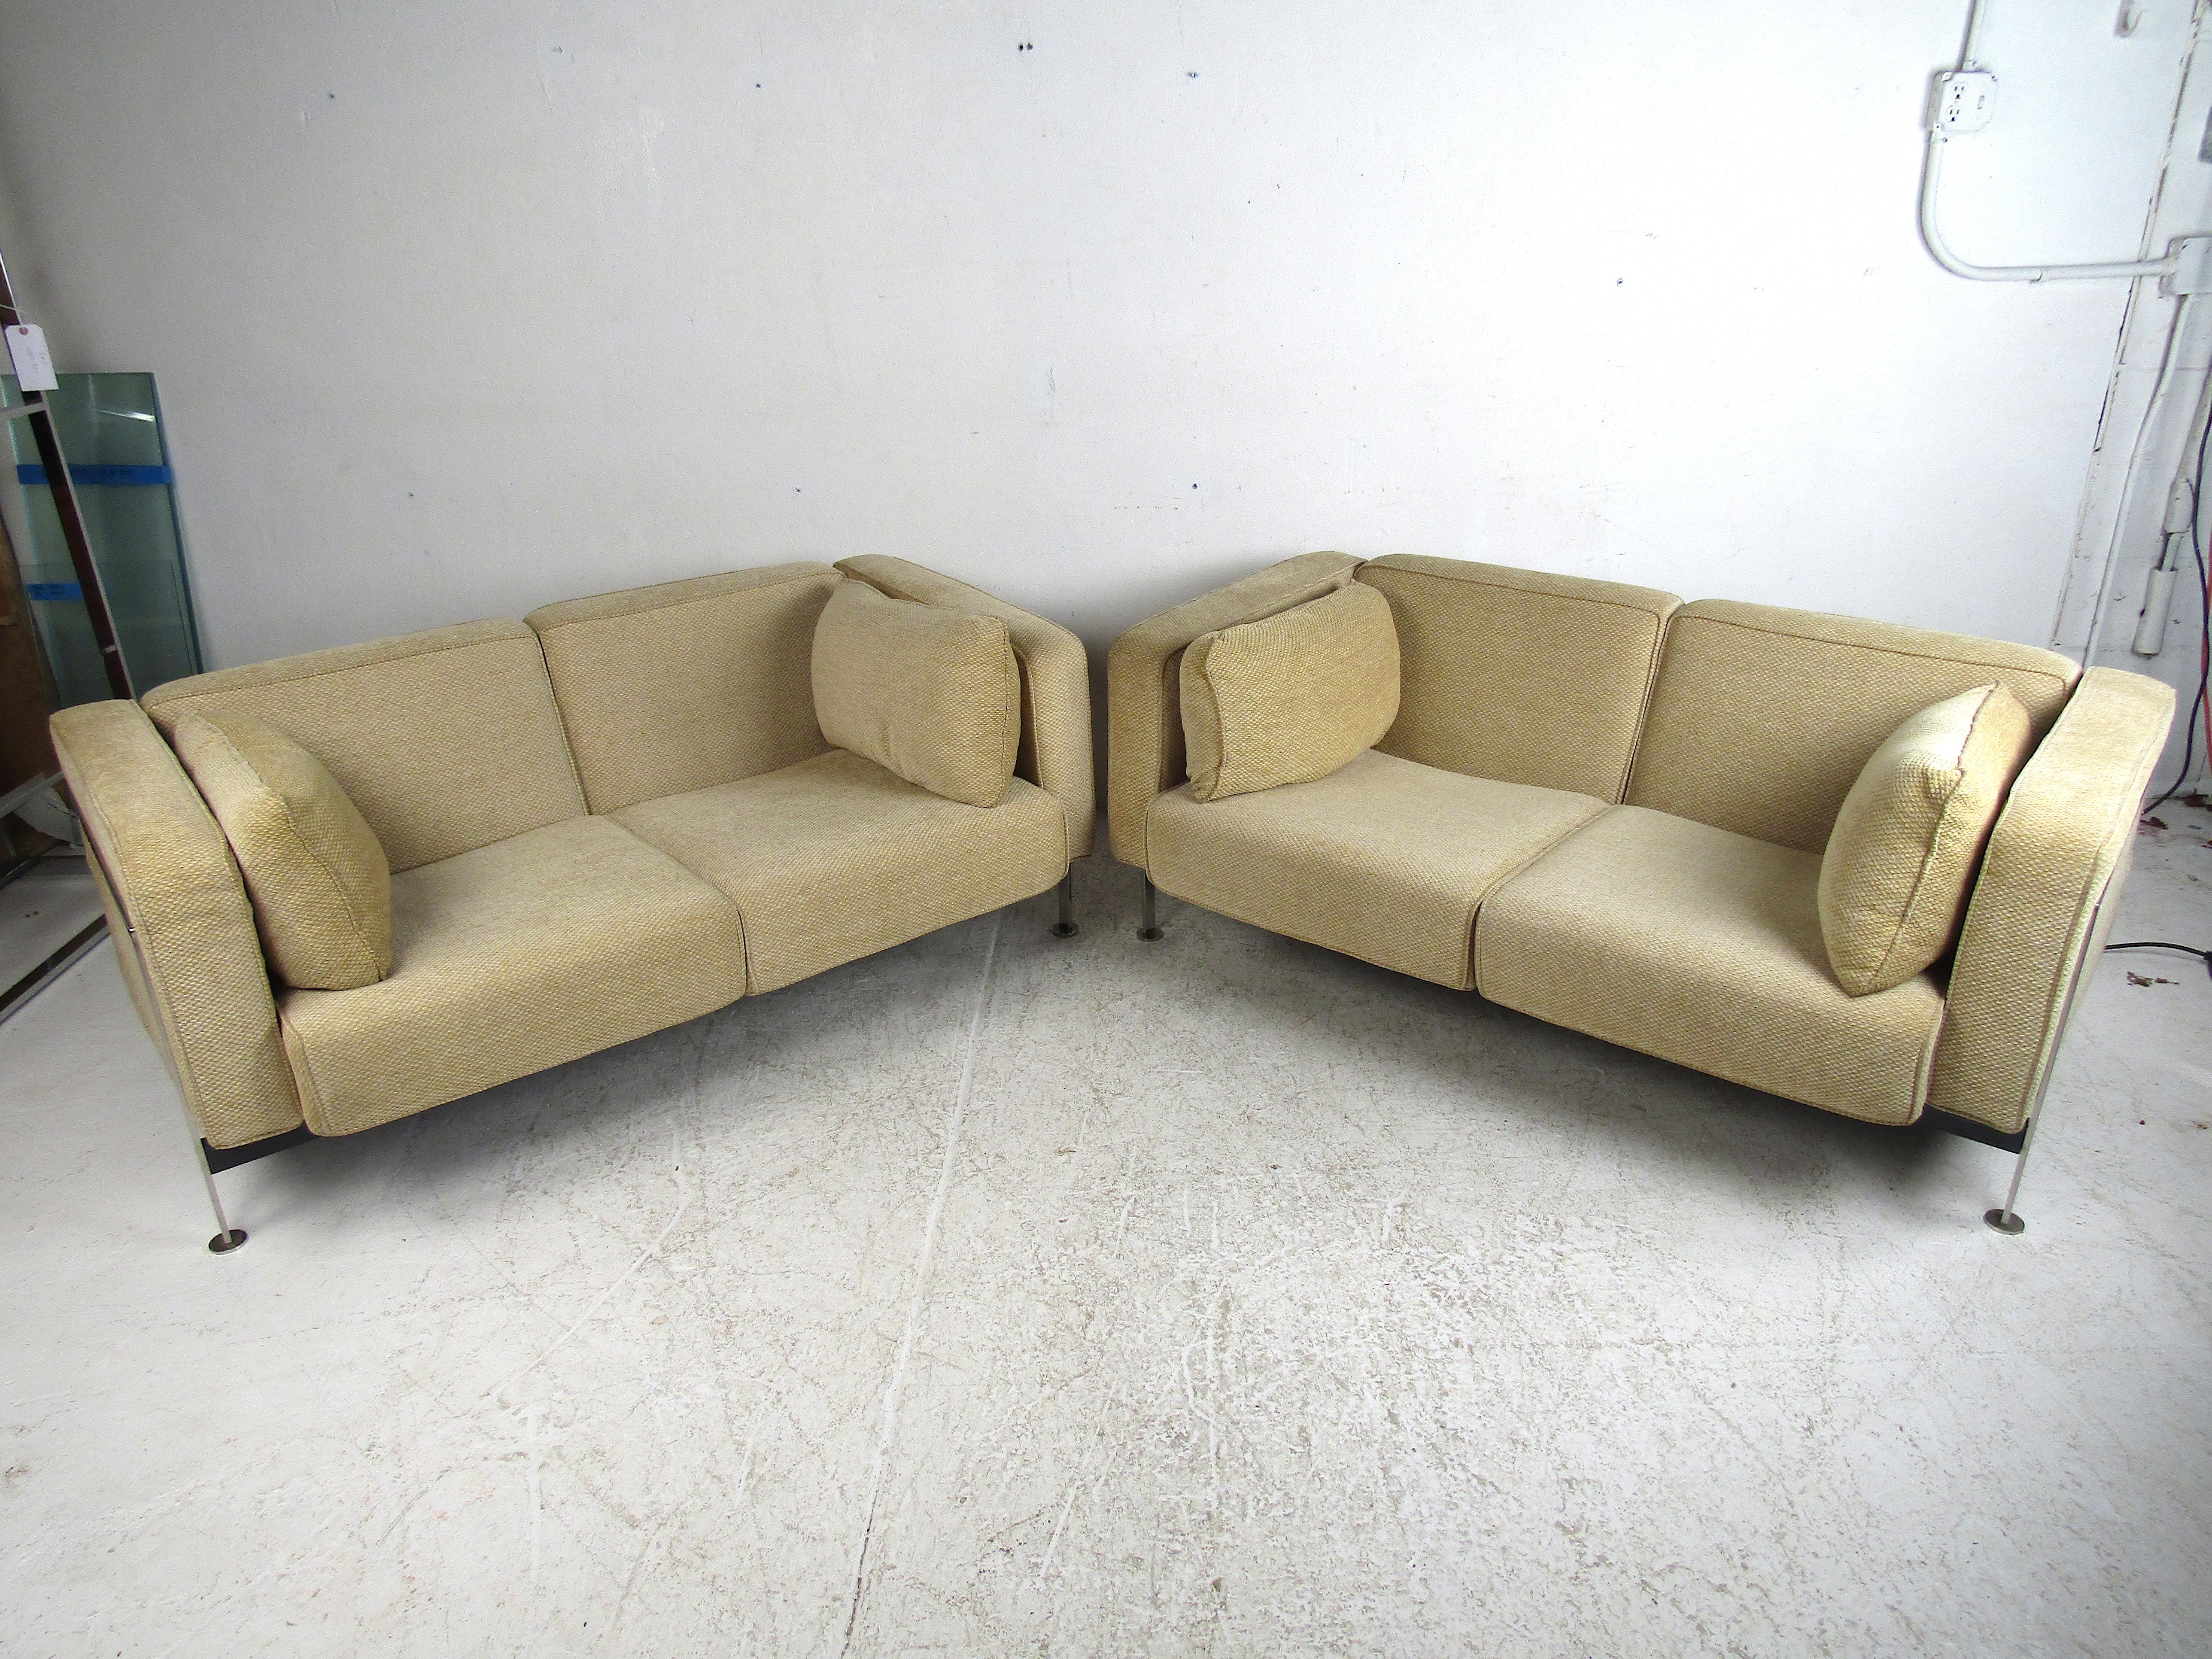 Great pair of Mid-Century Modern loveseats designed by Robert Haussmann. Quality construction with a sturdy polished steel frame spanning the sides and back of the pieces. Upholstered in a vintage beige fabric that has held up very well. This pair